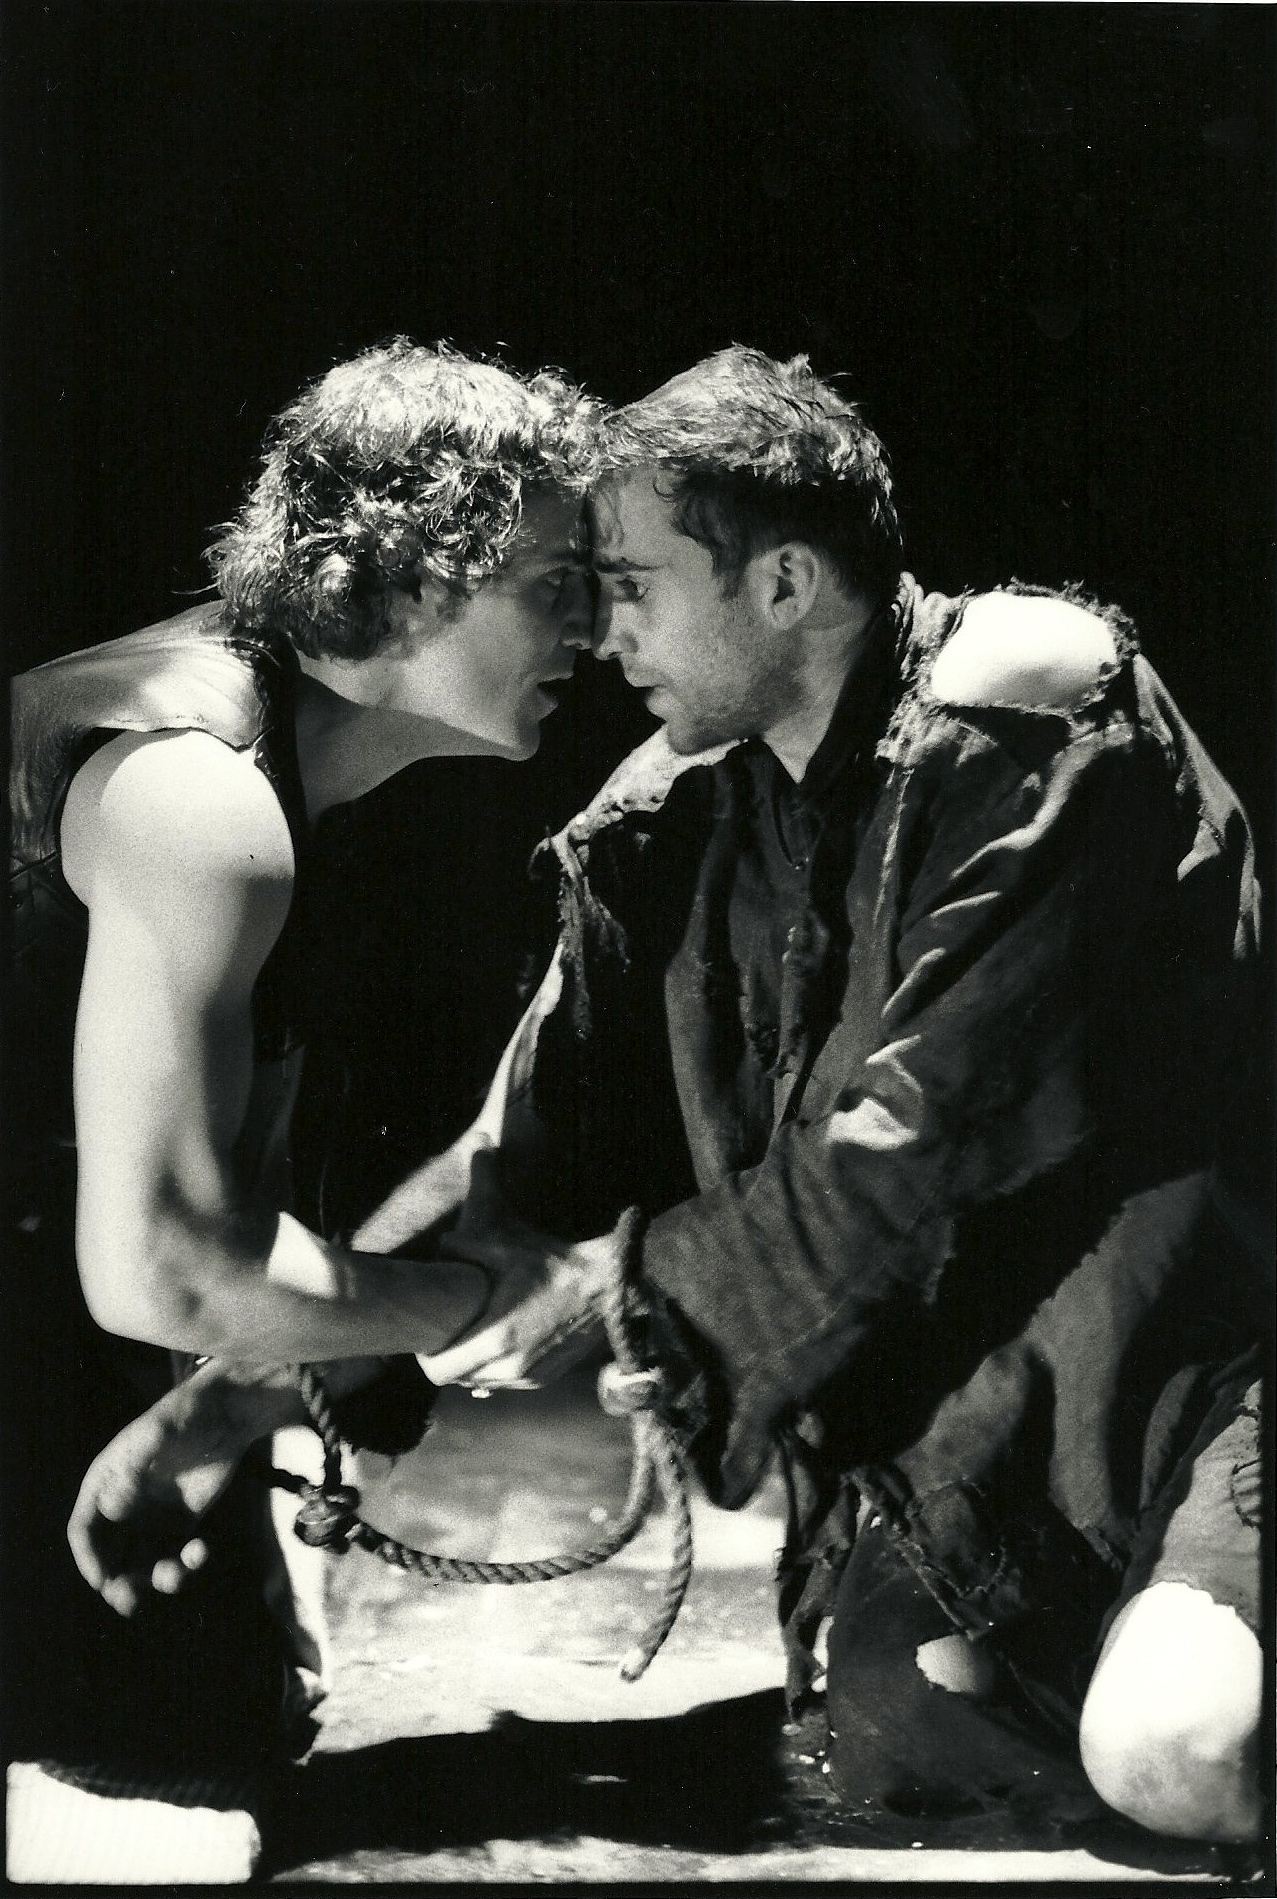 As Lightborne with Joseph Fiennes in 'Edward II' at The Sheffield Crucible Theatre in 2001